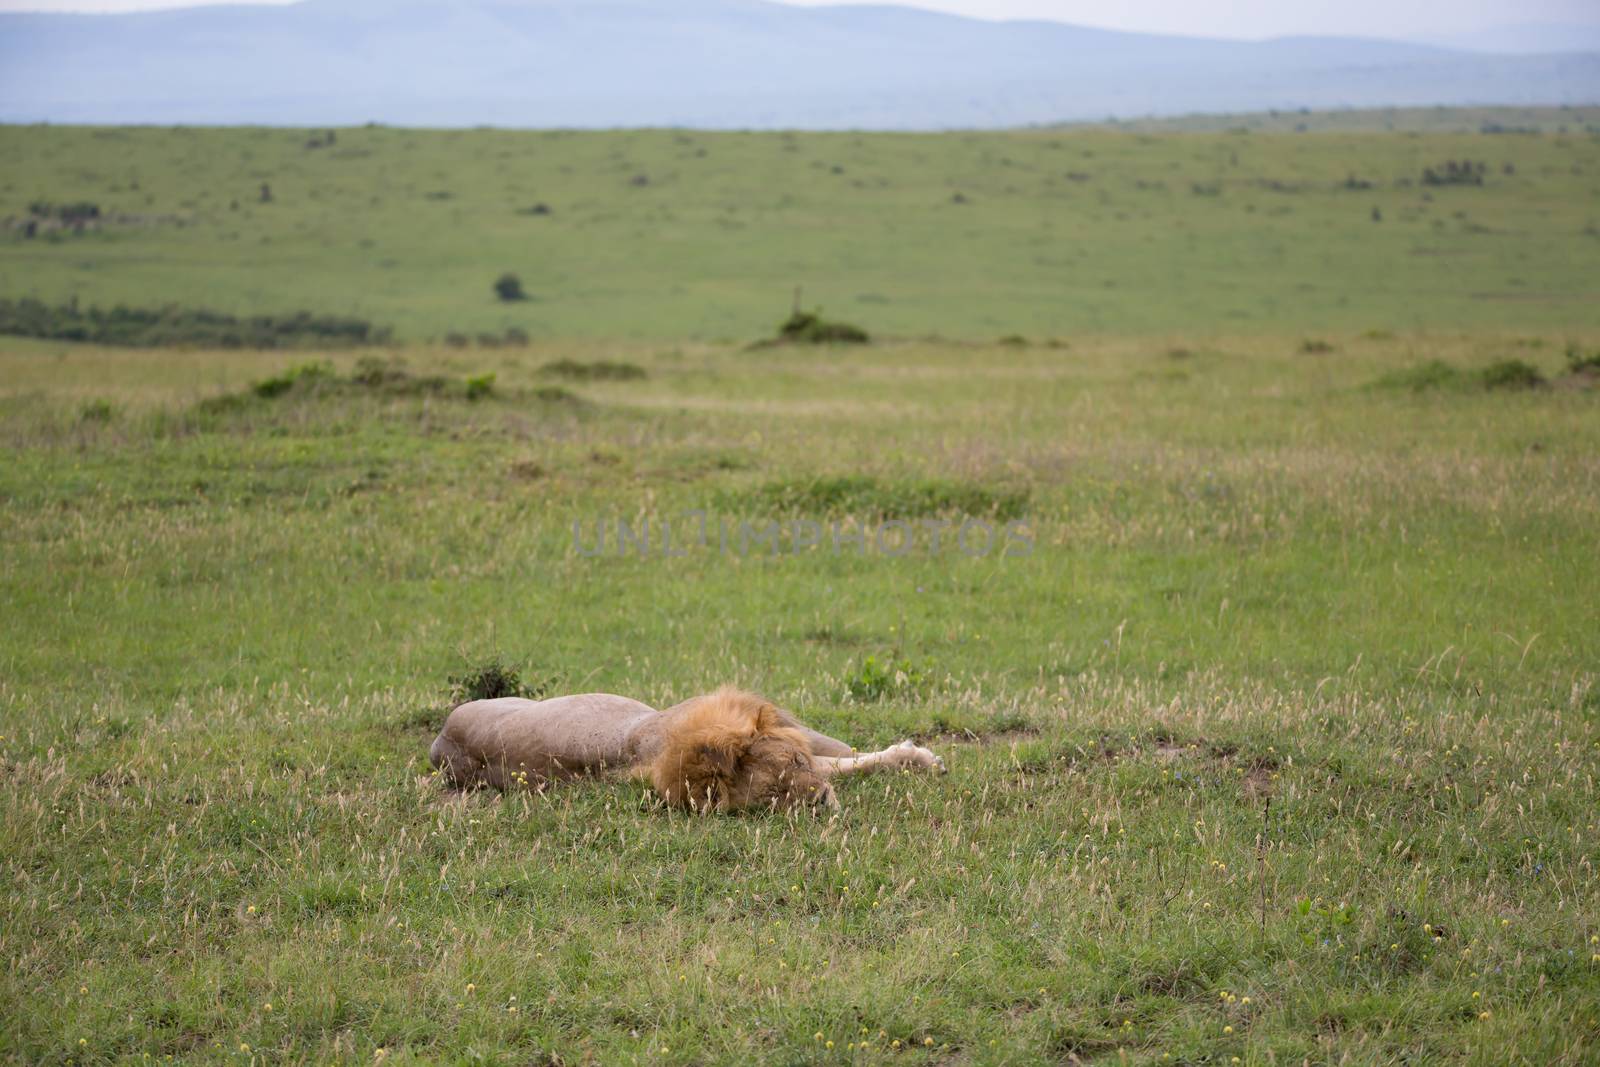 A big lion lies in the grass in the savanna of Kenya by 25ehaag6